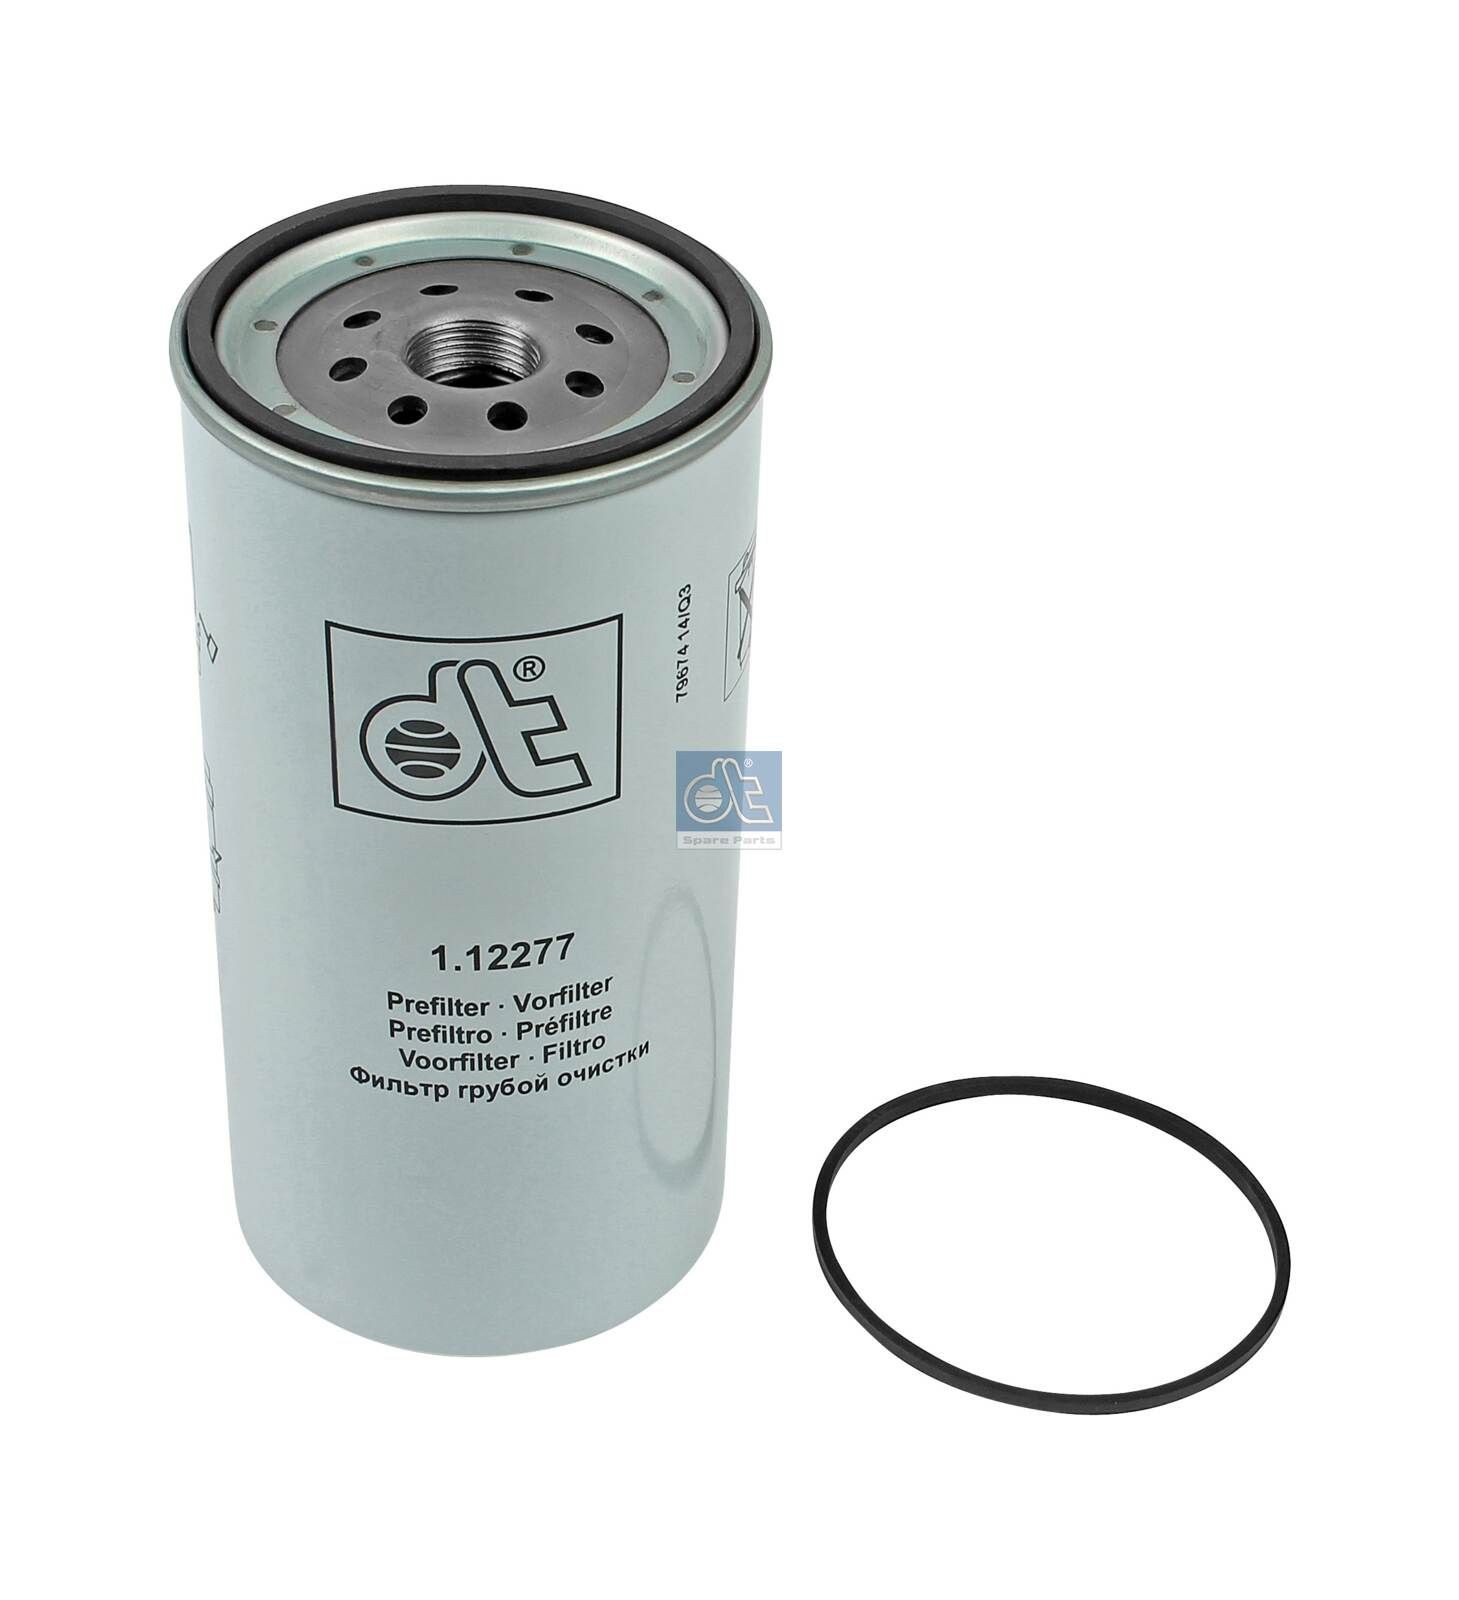 WK 1080/6 x DT Spare Parts 1.12277 Fuel filter 7421380500